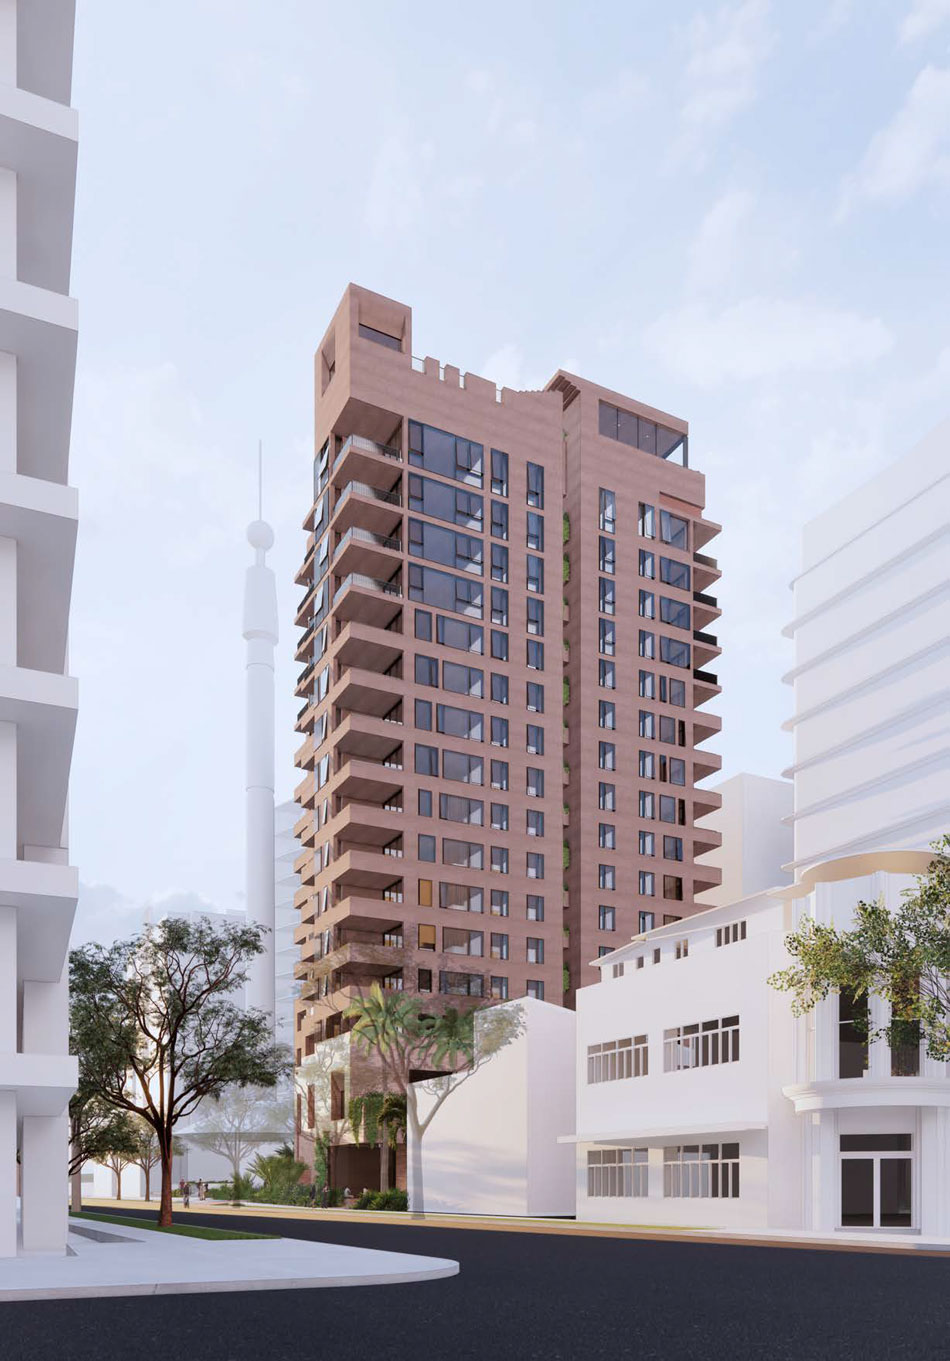 Architectural rendering of Aria's new project at 164-190 Melbourne St, South Brisbane